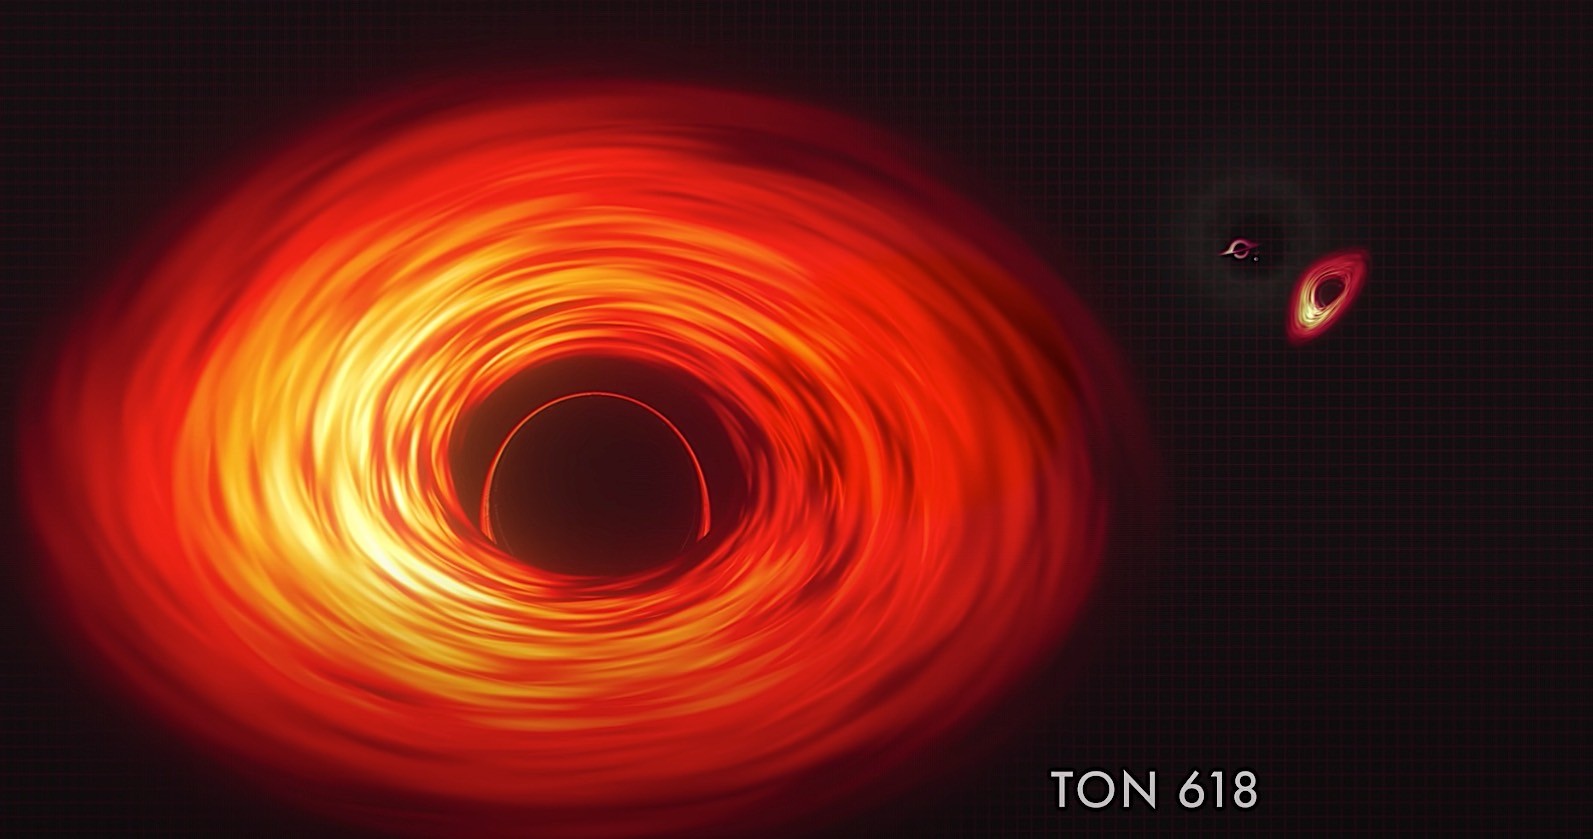 It's Absolutely Scary How Massive Black Holes Are, Ton 618 Is 60